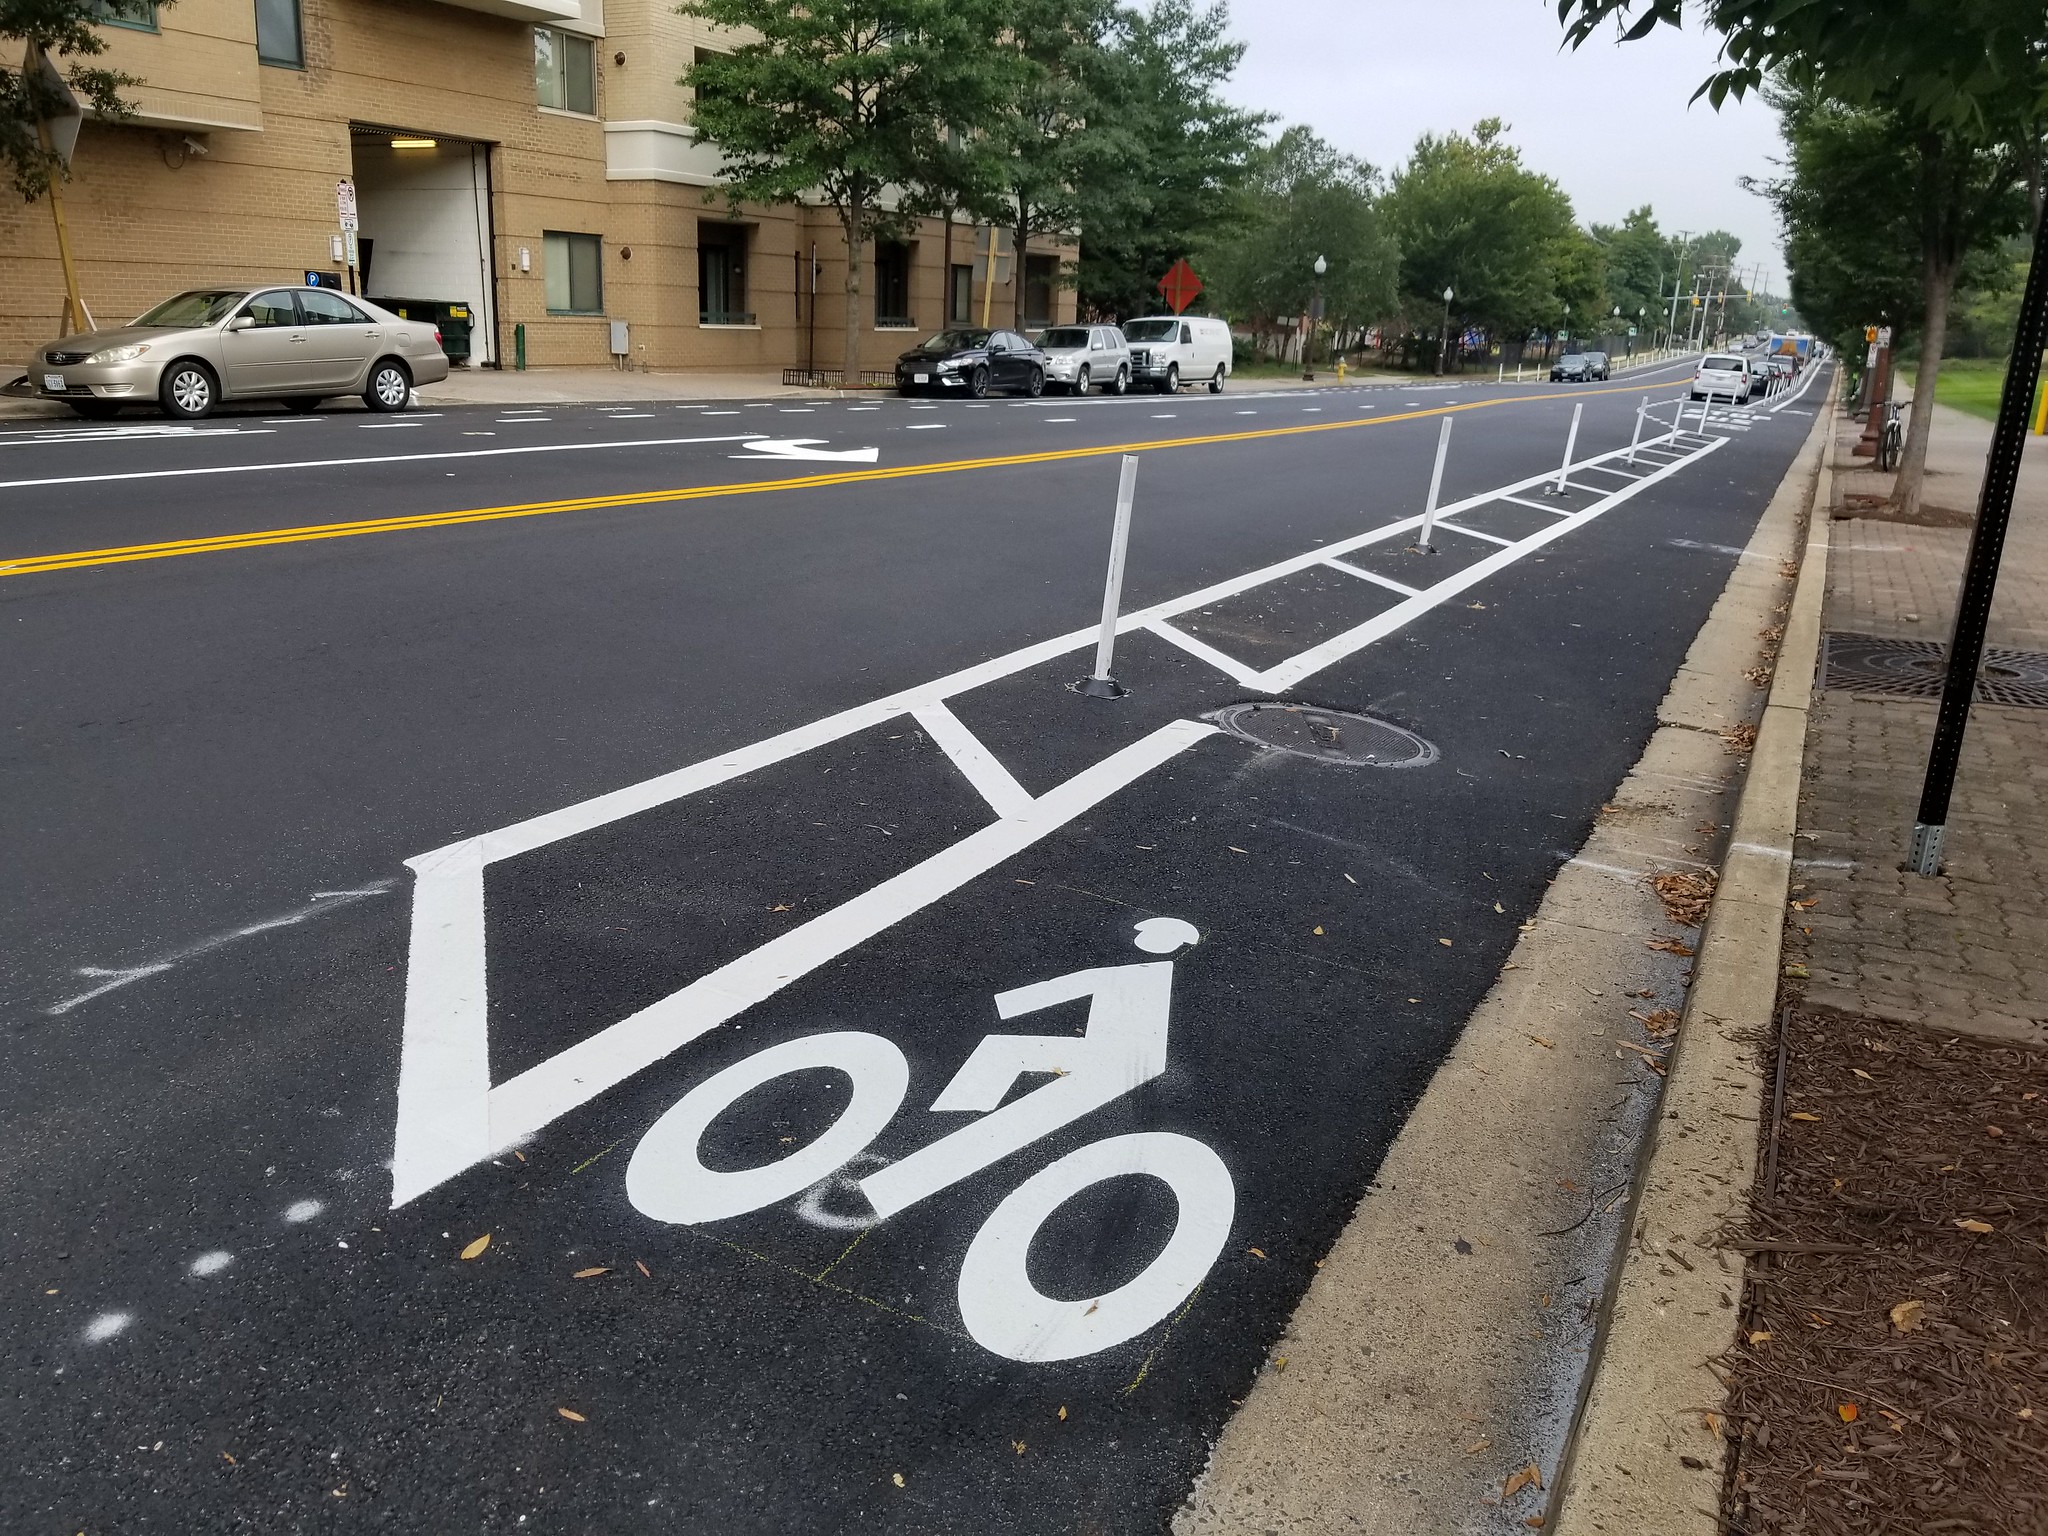 An image of a street with a bike lane